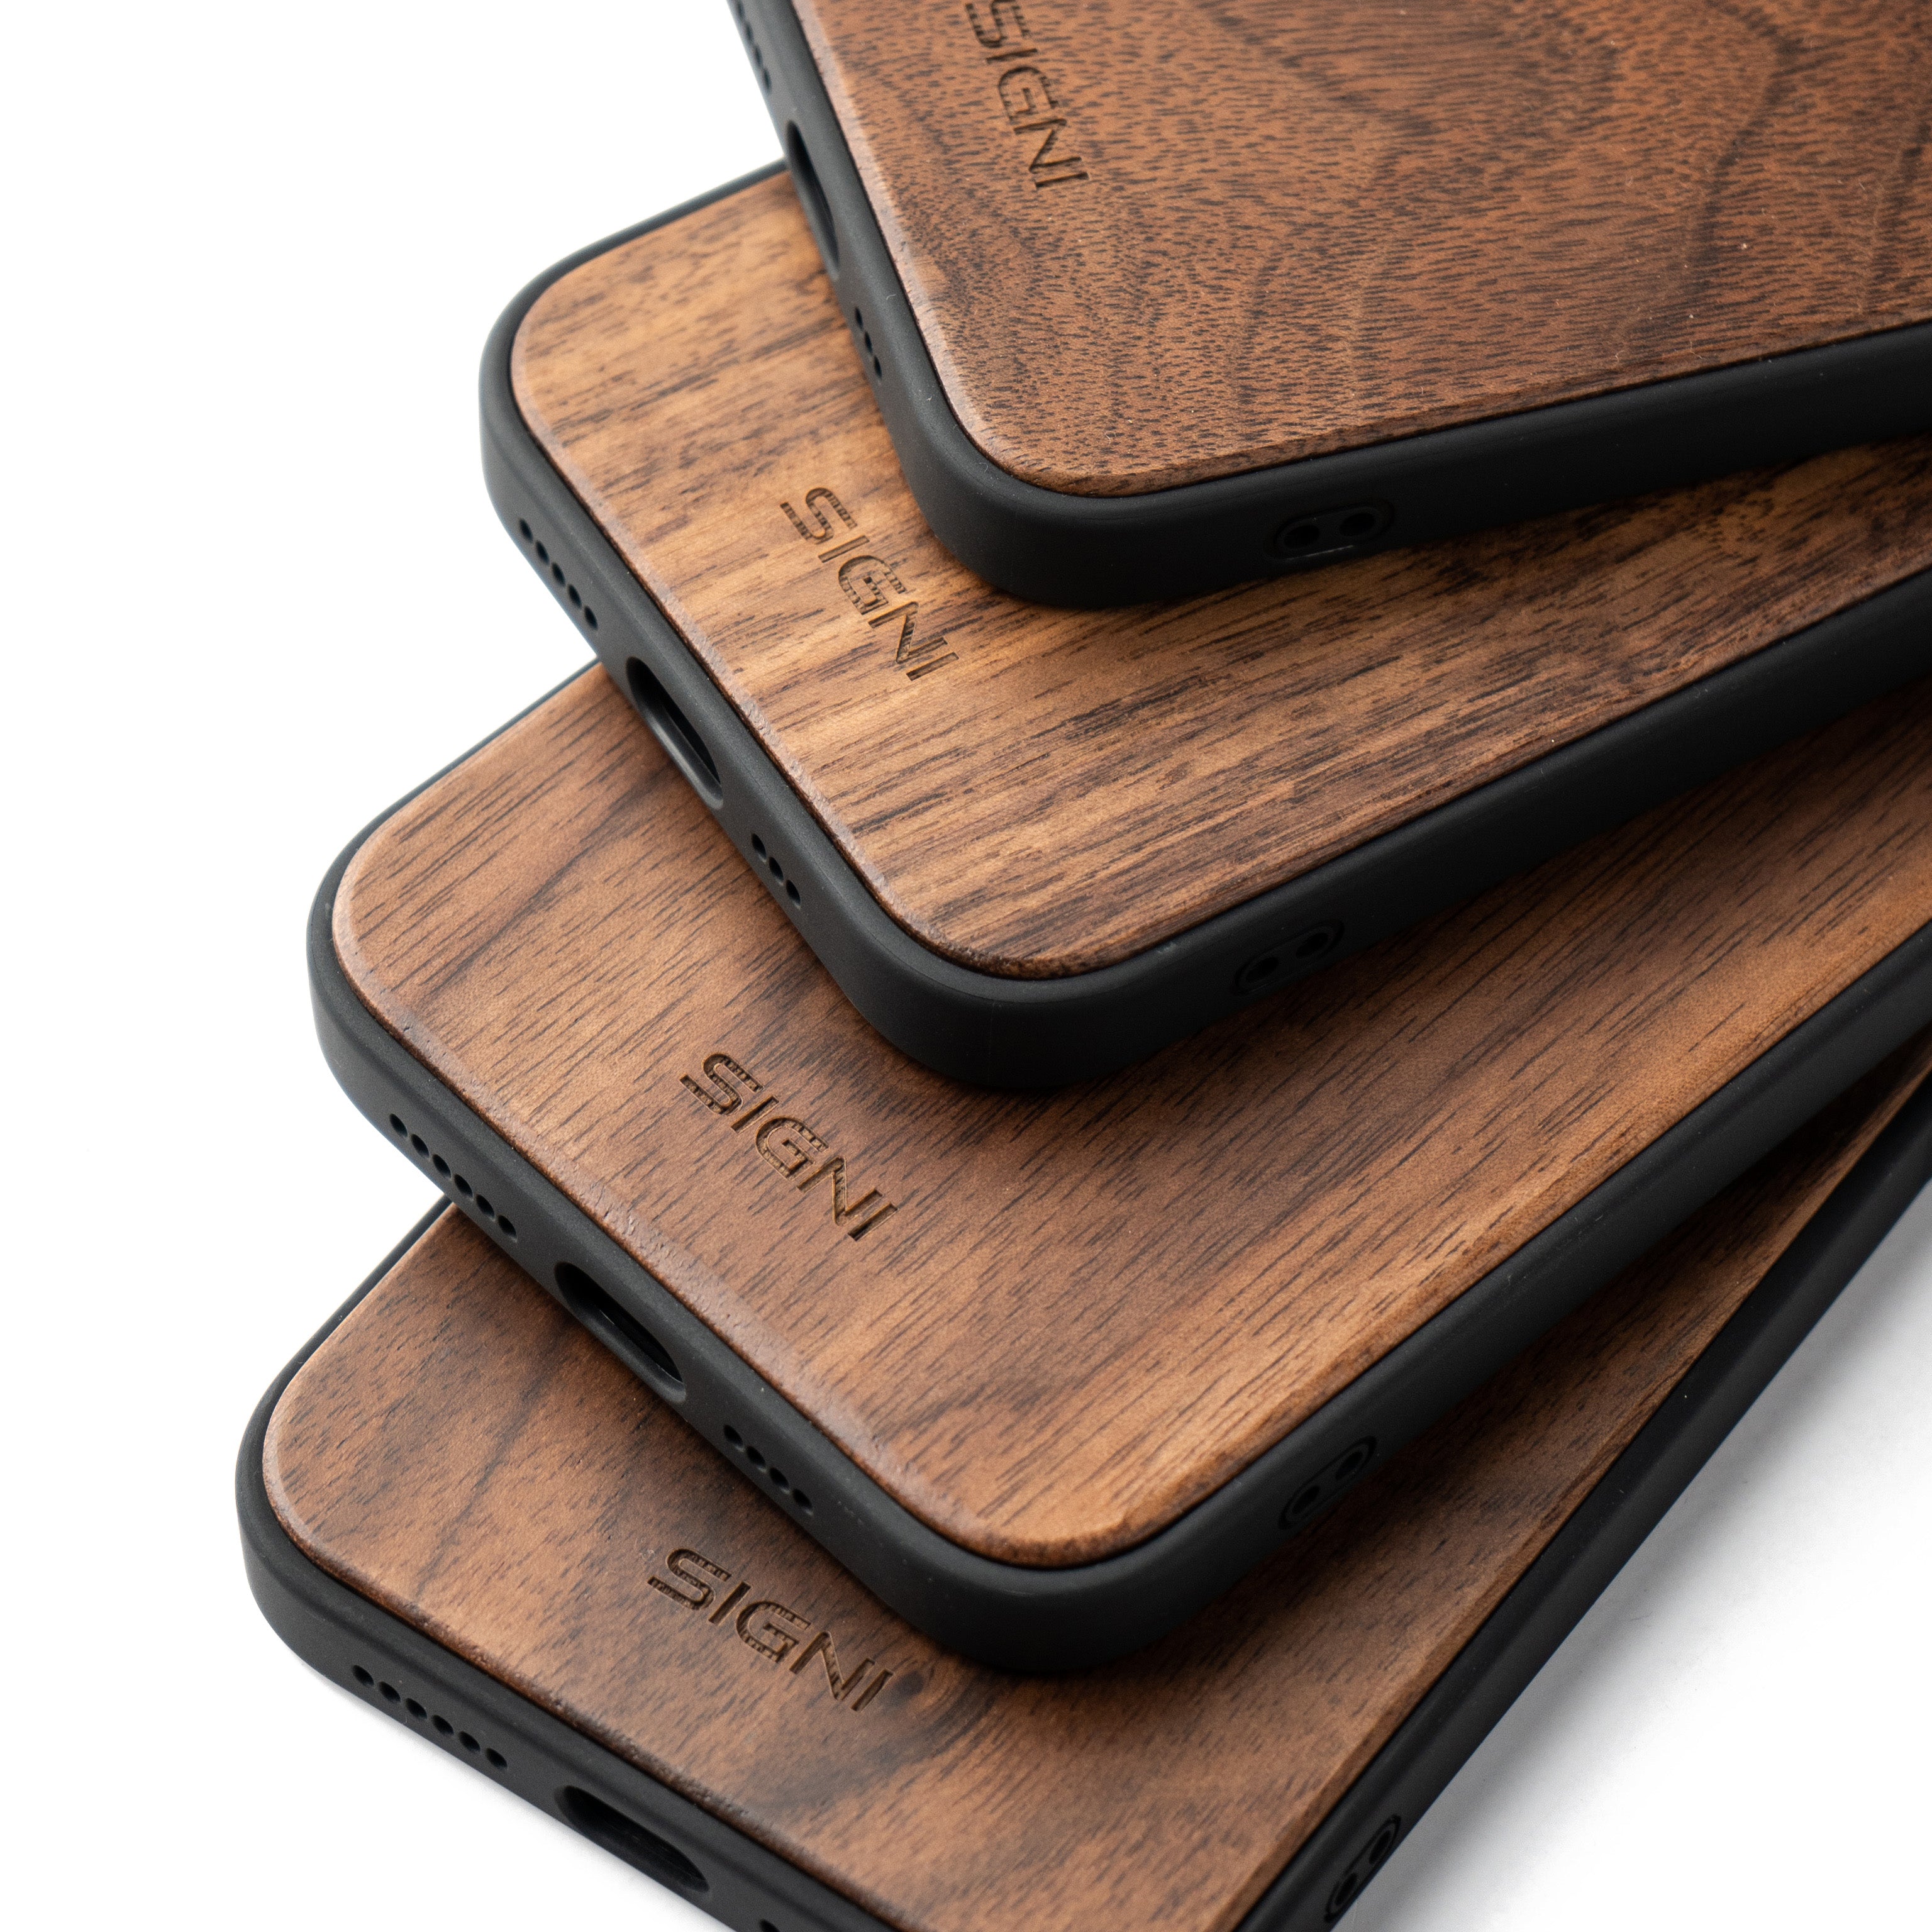 SKYVIK SIGNI One Wooden Mobile Lens case (iPhone 14)